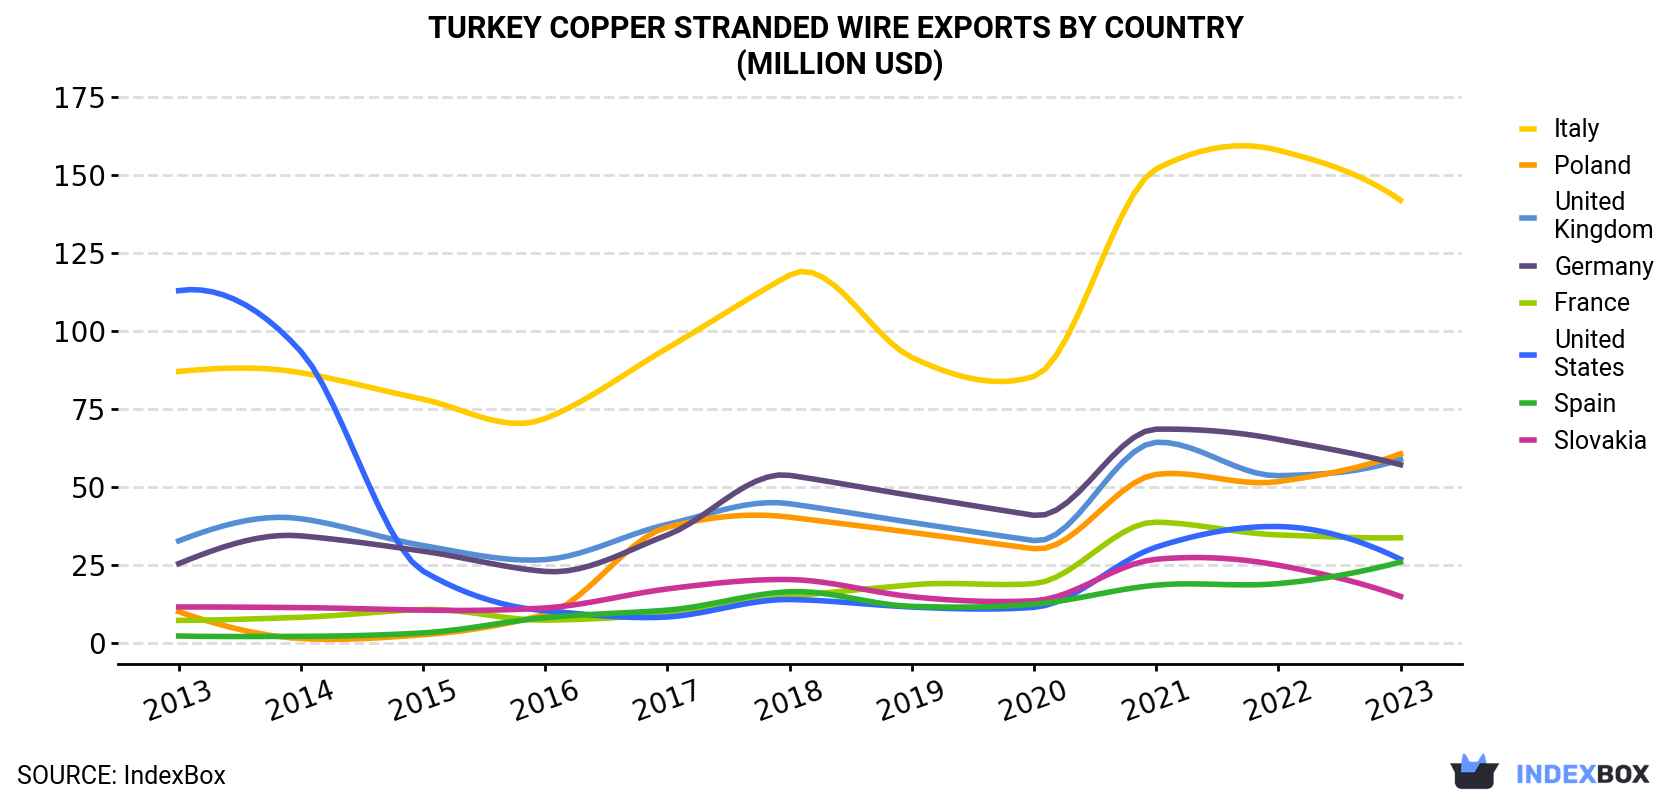 Turkey Copper Stranded Wire Exports By Country (Million USD)